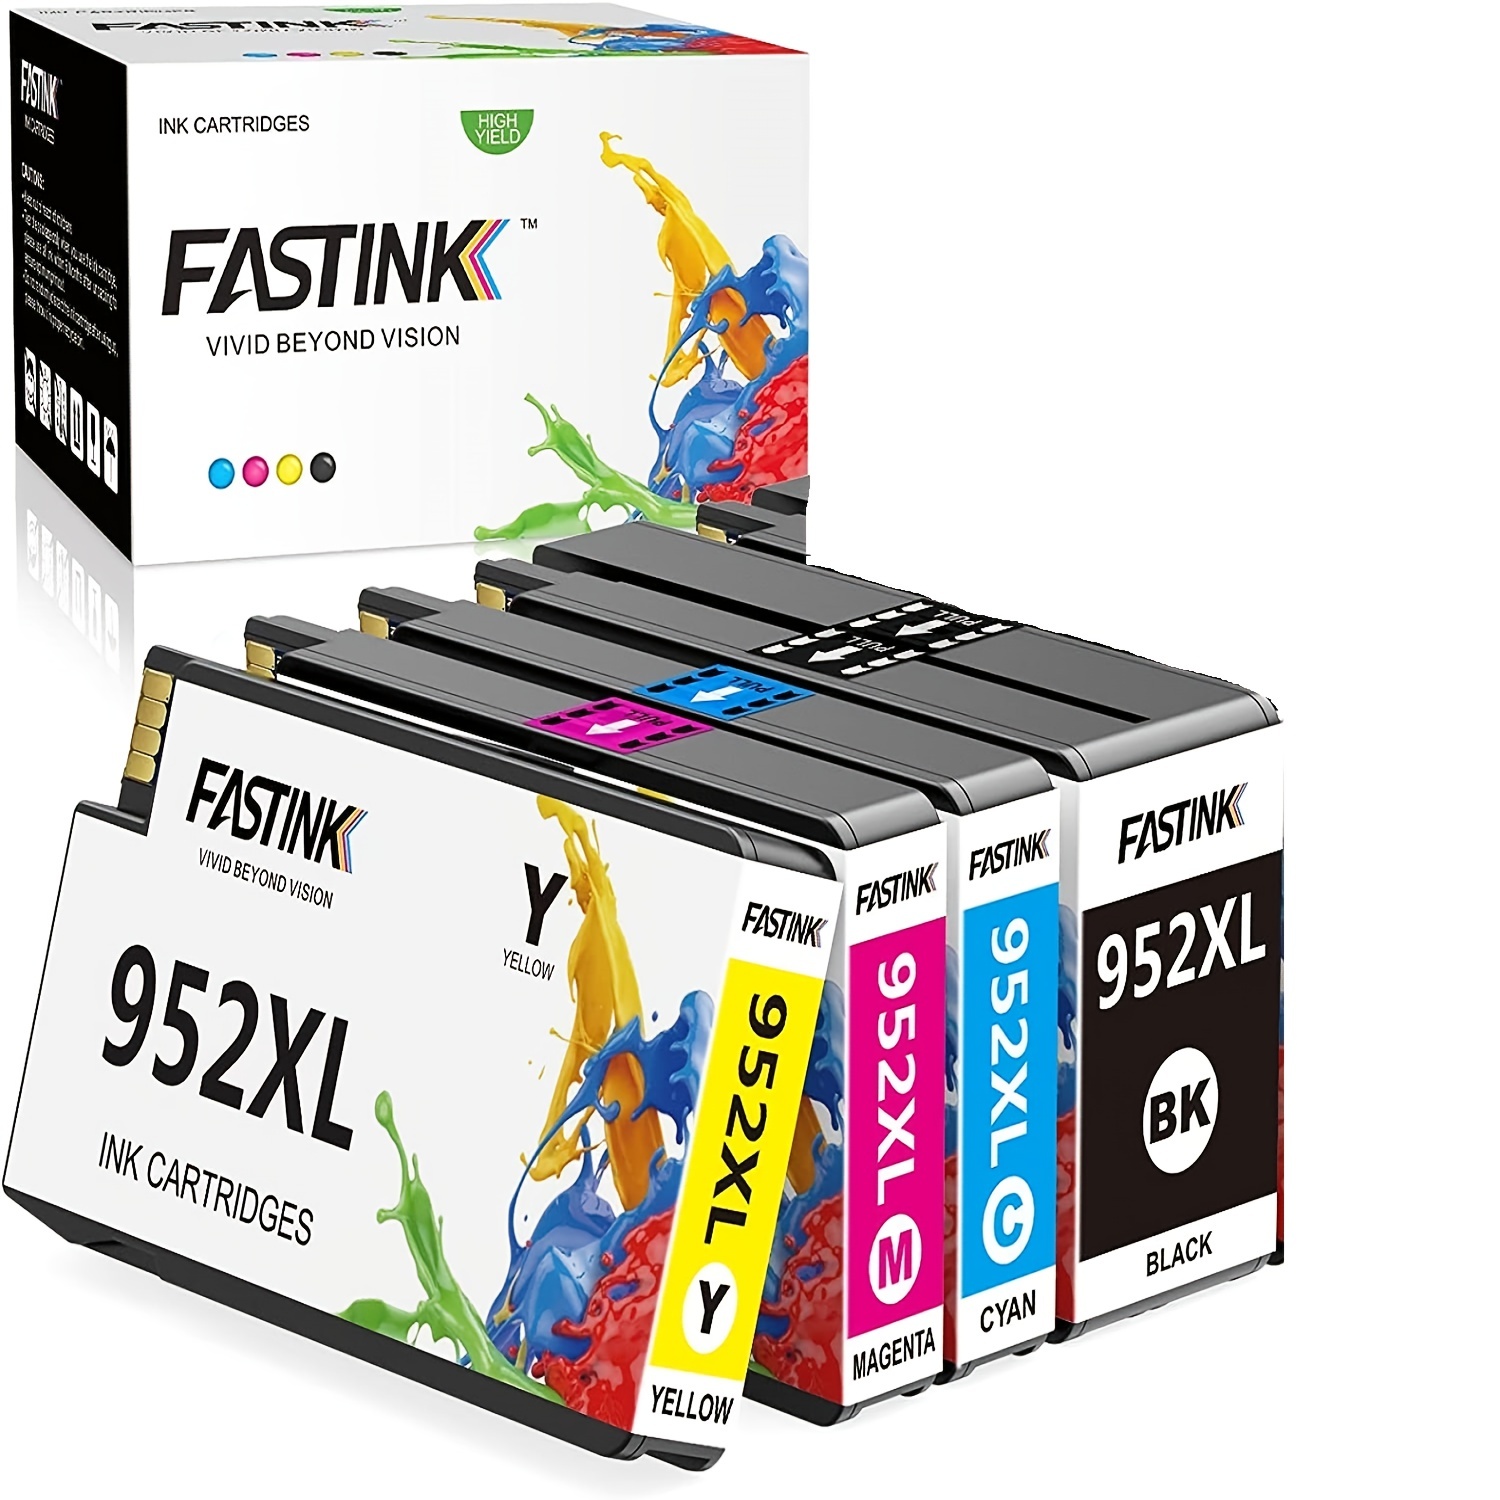 Colorking 903XL New Chip High Yield Ink Cartridges Replacement for